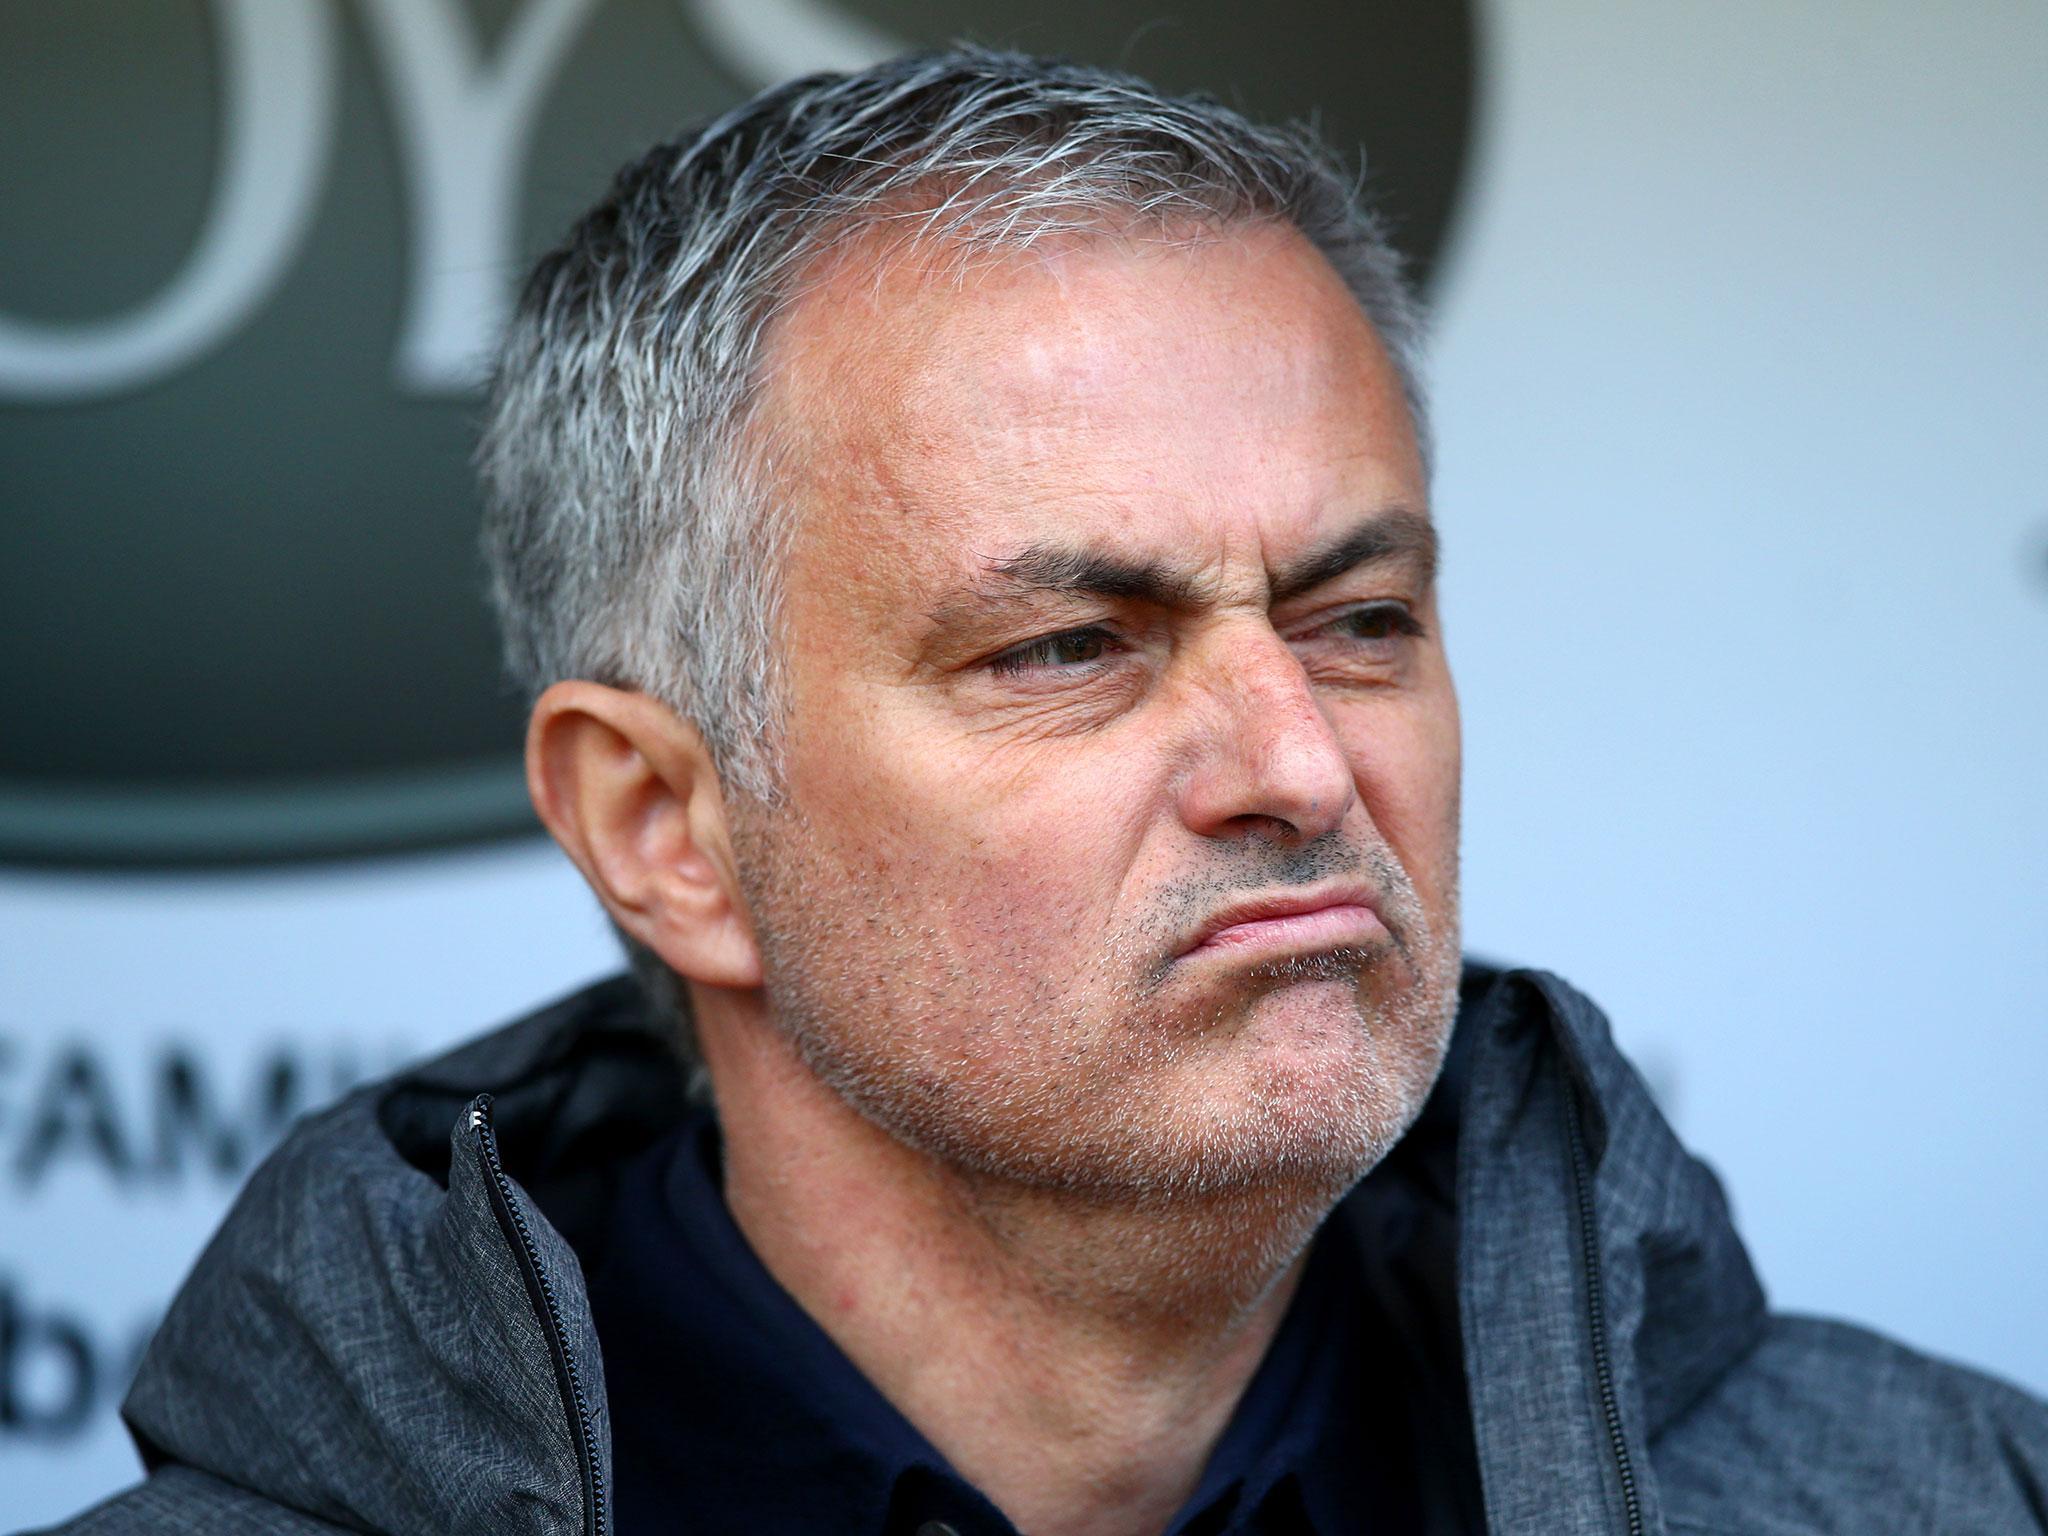 Jose Mourinho isn't happy with how his players use social media